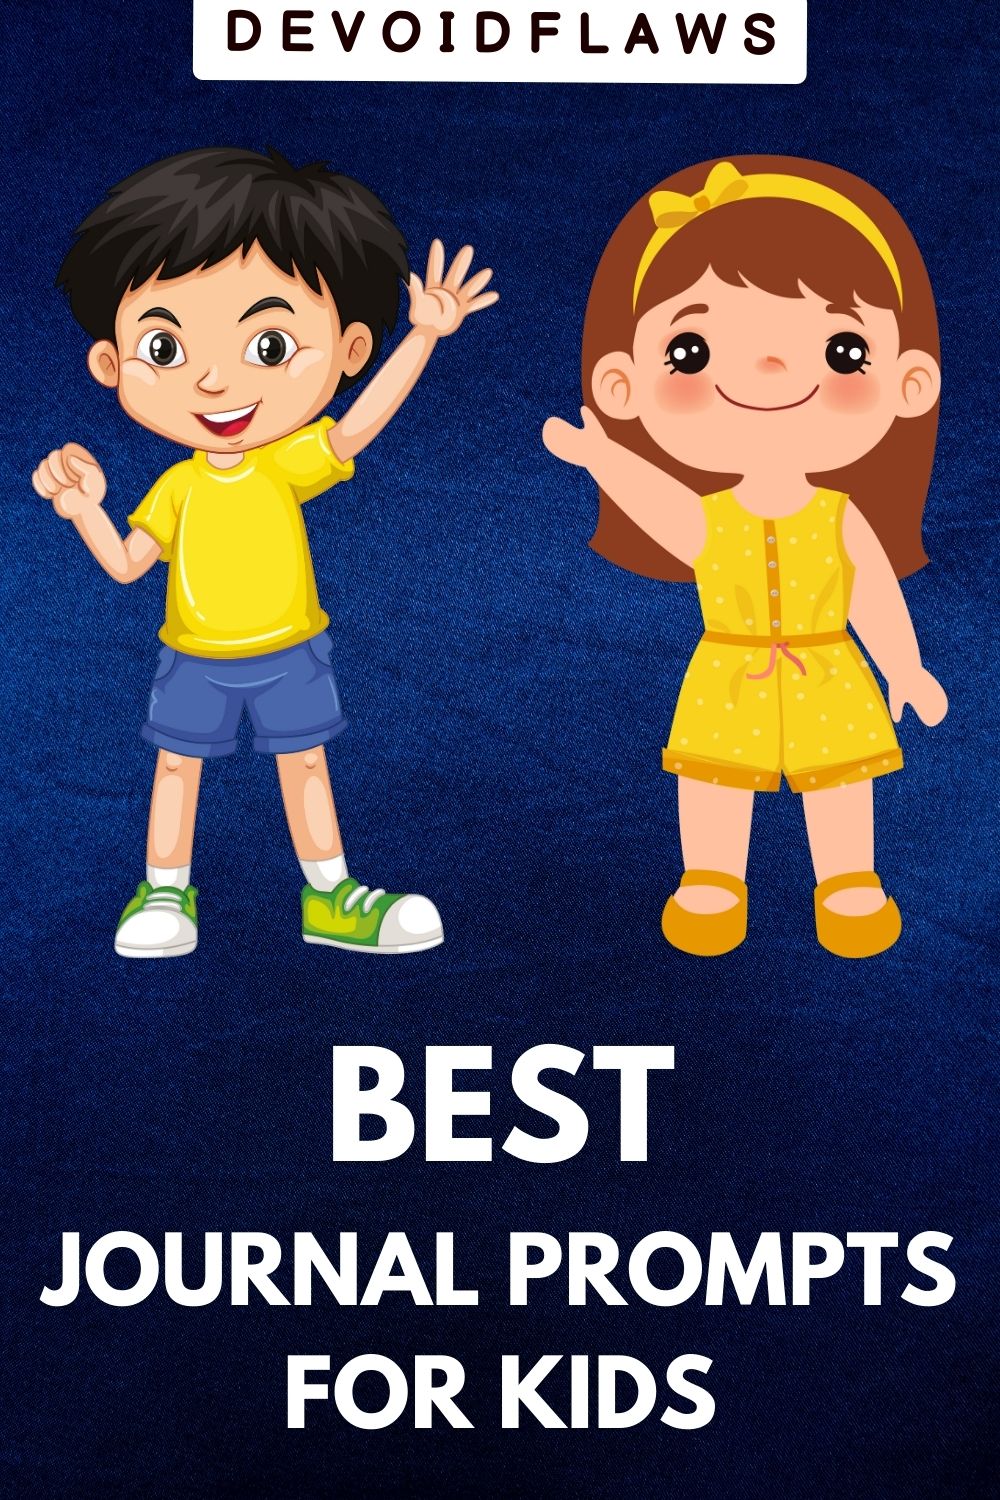 image with text - best journal prompts for kids